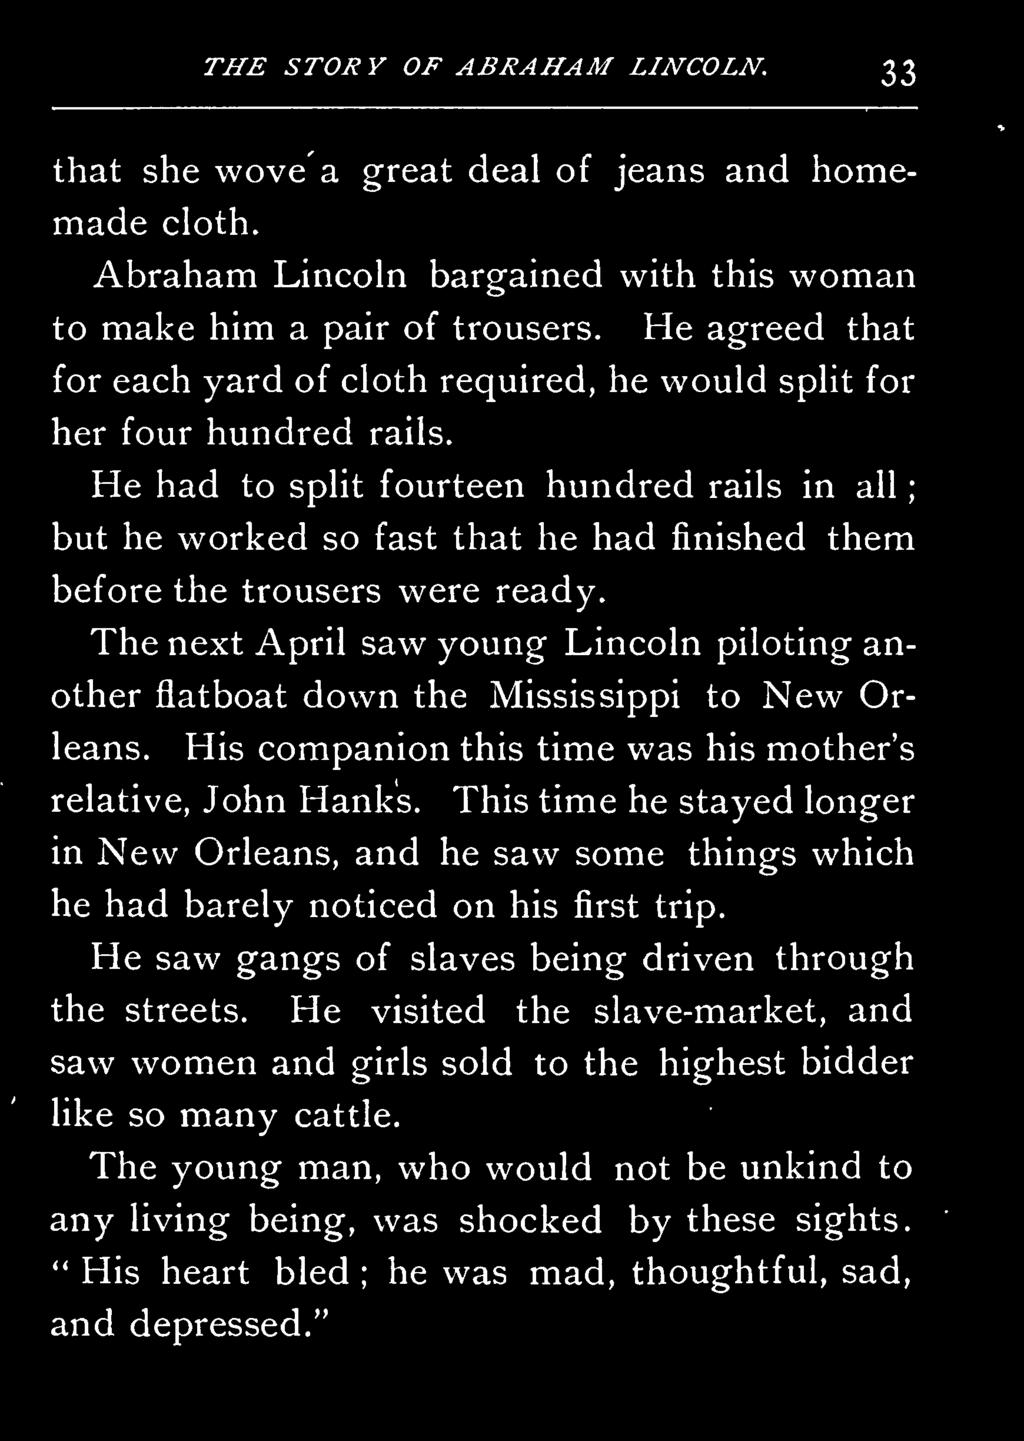 The next April saw young Lincoln piloting another flatboat down the Mississippi to New Orleans. His companion this time was his mother's relative, John Hanks.